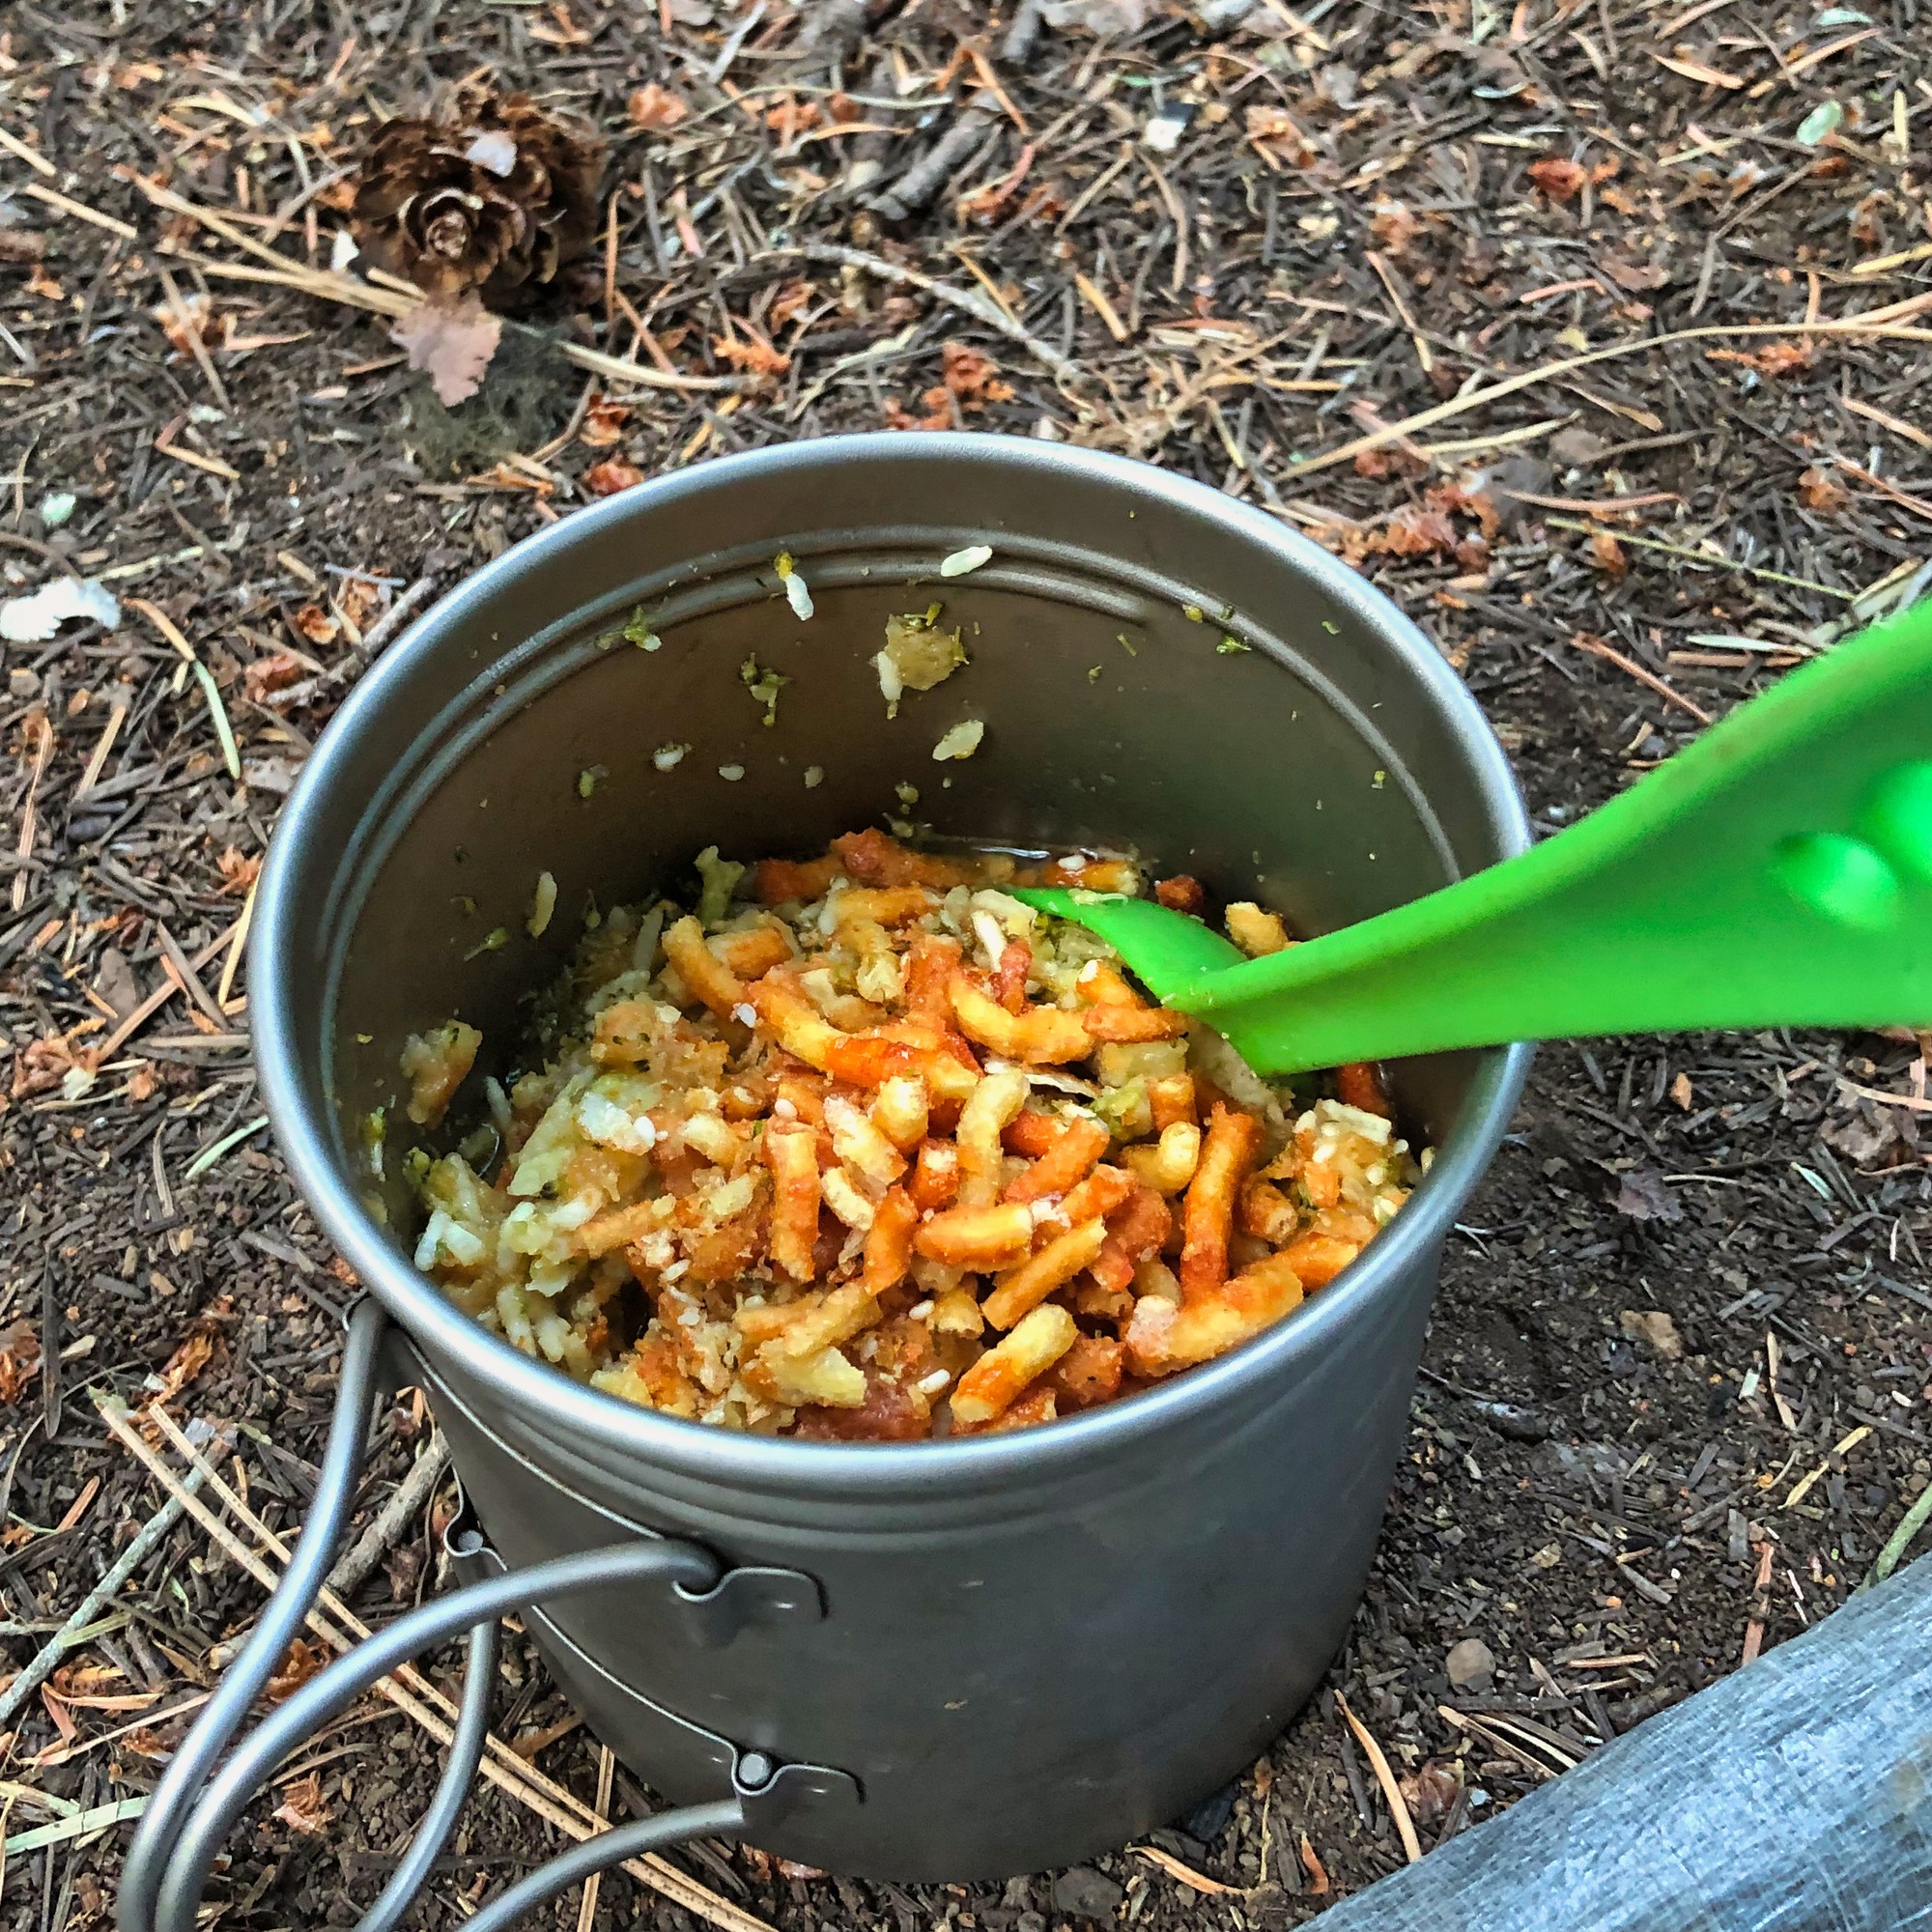 Freeze-Drying Your Own Backpacking Meals: How to Eat Your Favorite Town